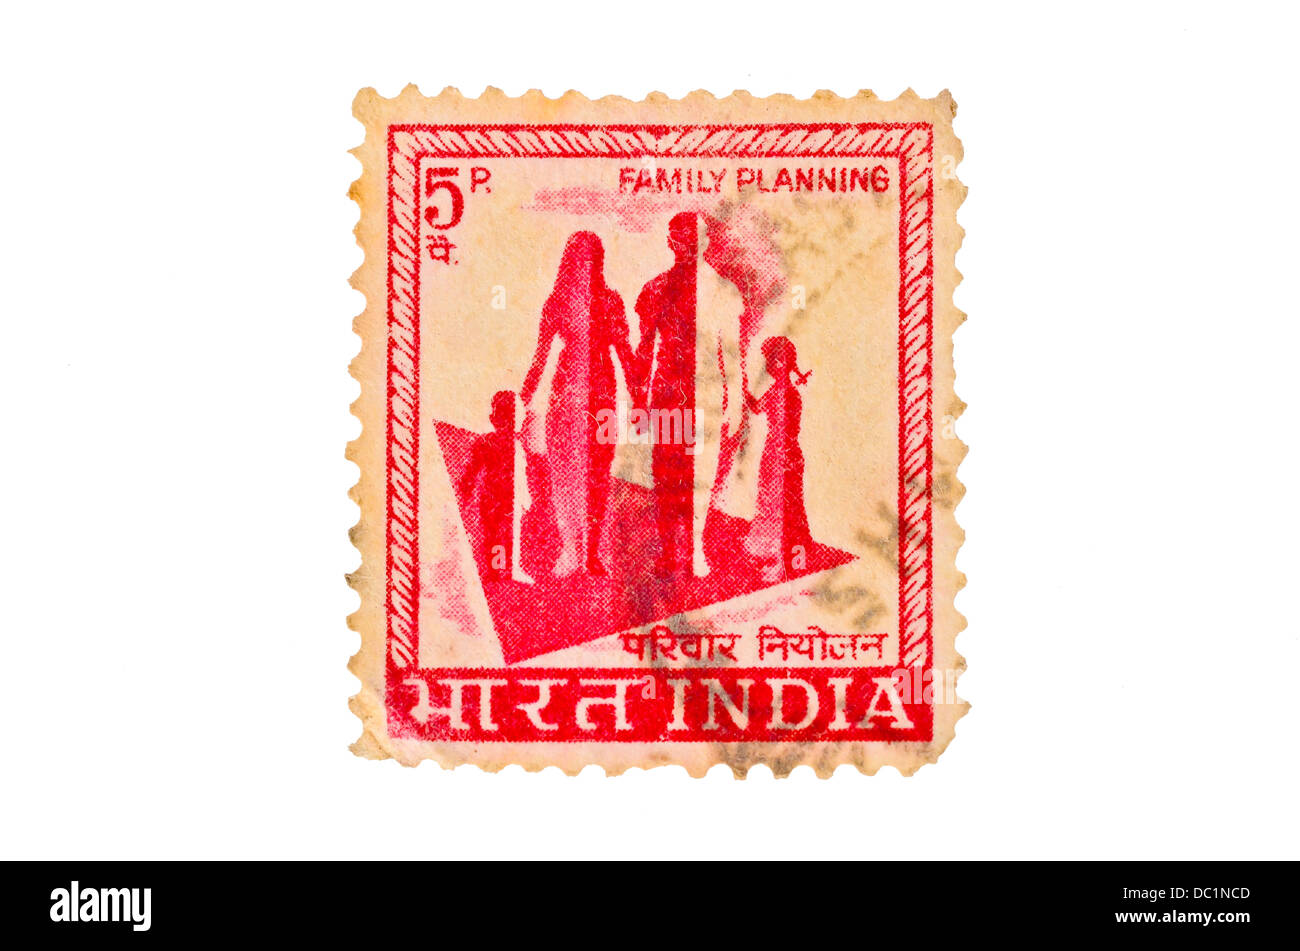 A stamp printed in India shows image of a family with the inscription 'family planning', series, circa 1965 Stock Photo